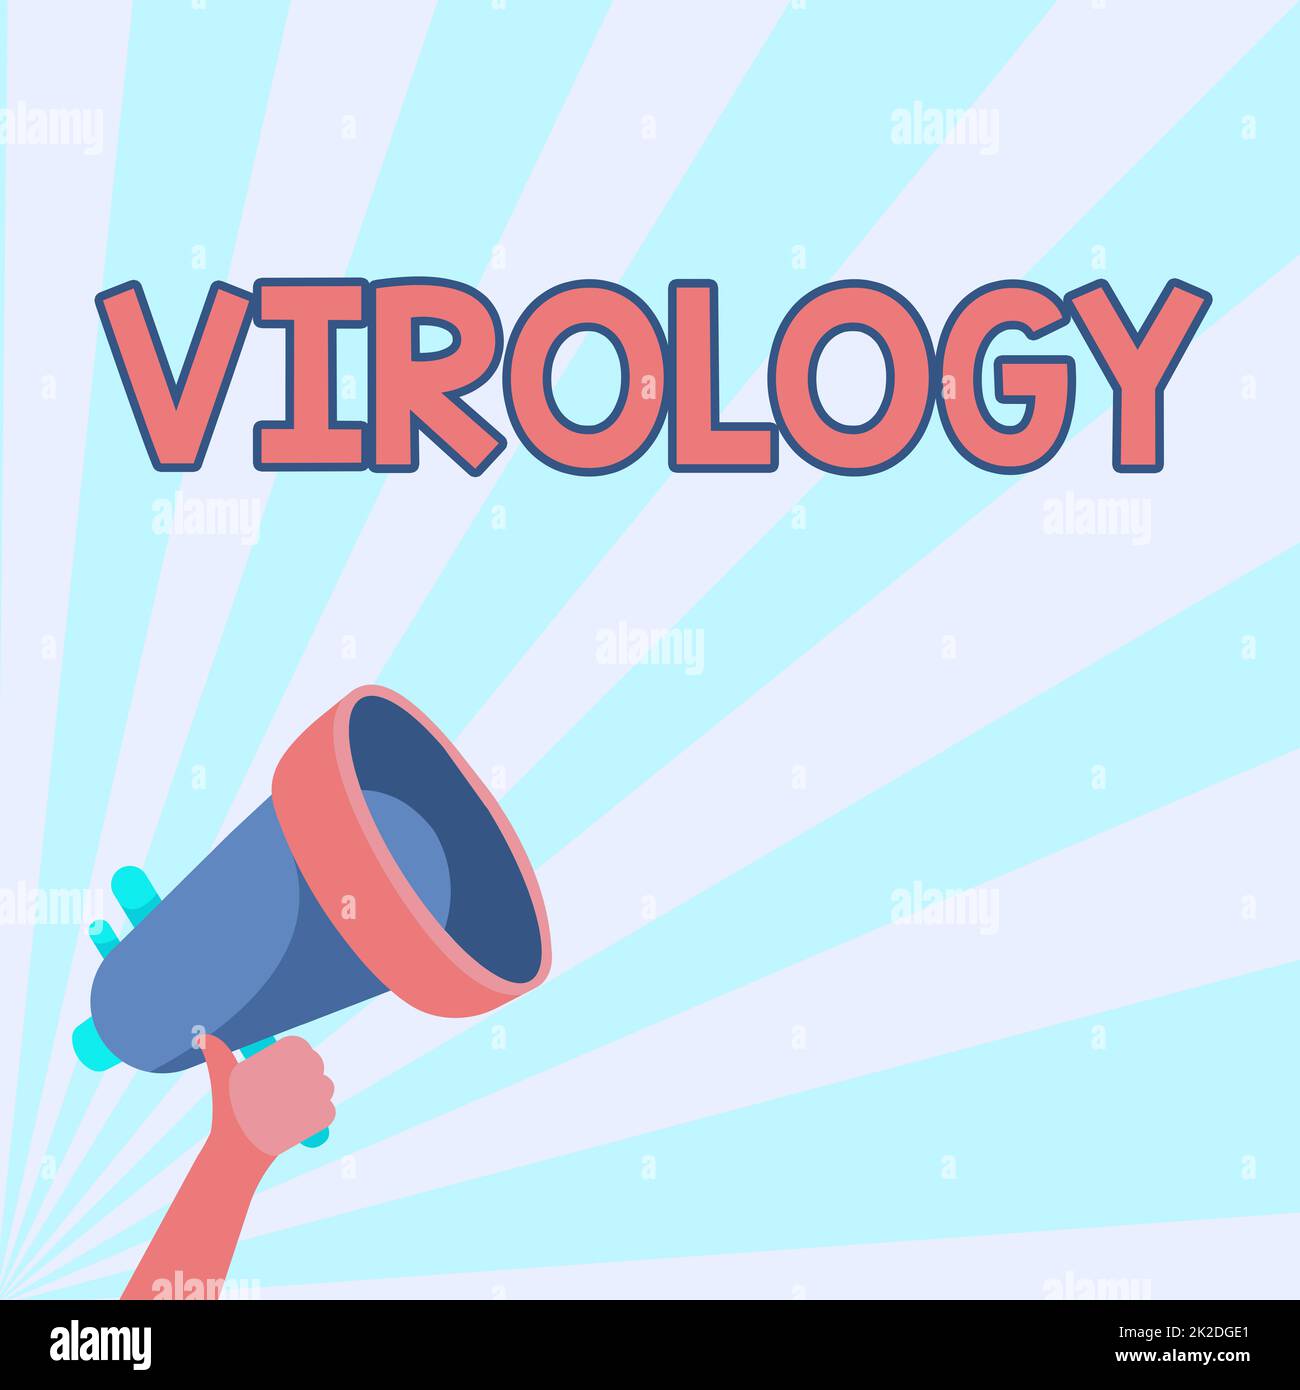 Inspiration showing sign Virology. Concept meaning Virology Illustration Of Hand Holding Megaphone Making Wonderful Announcement. Stock Photo